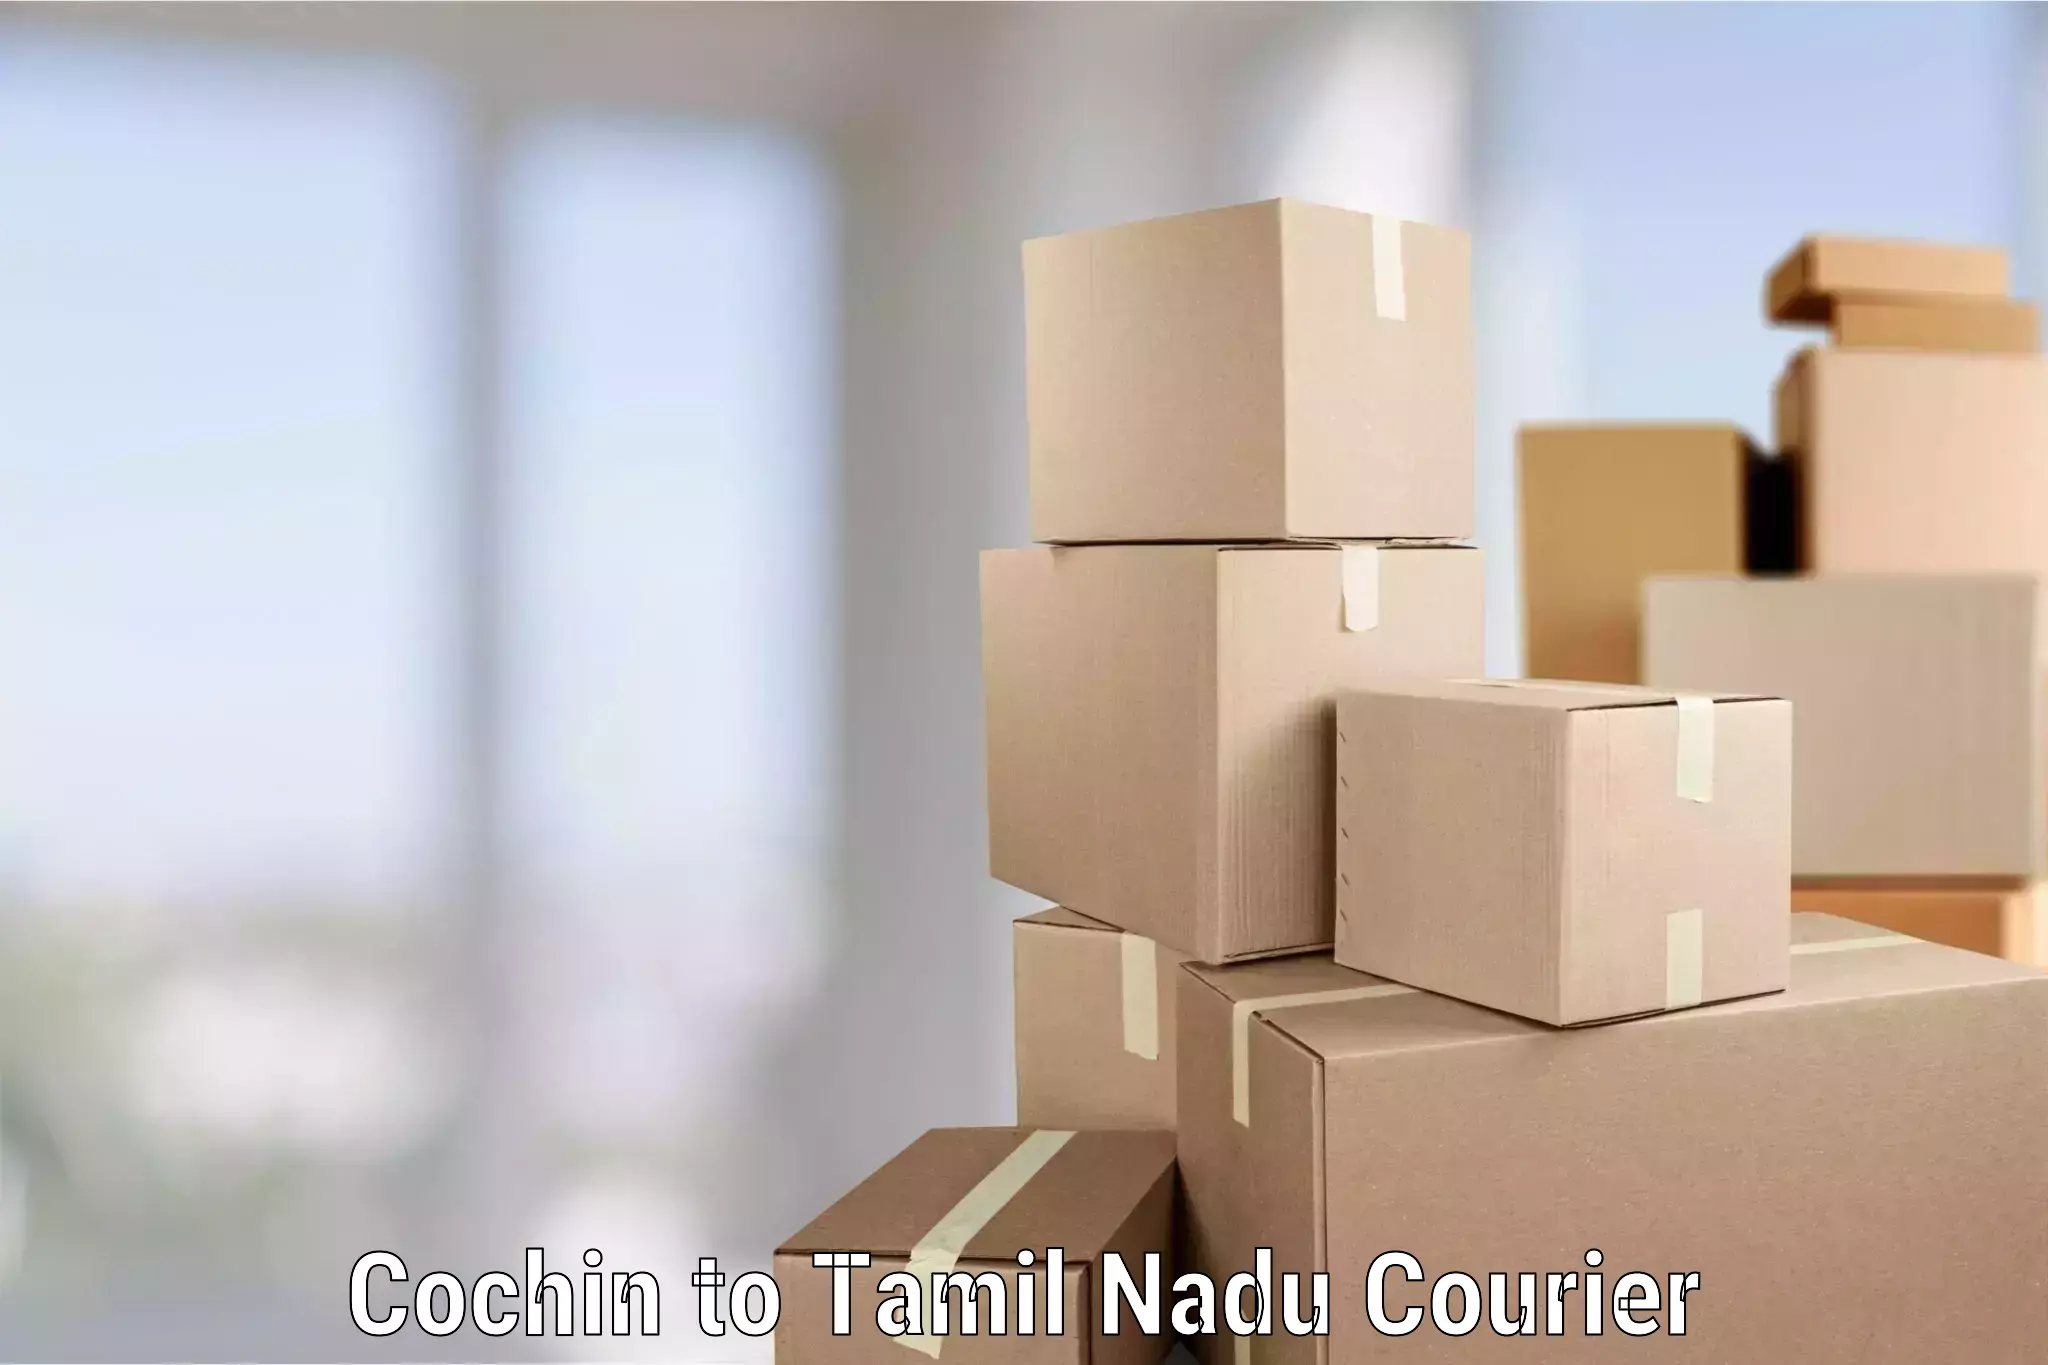 Furniture delivery service Cochin to Tamil Nadu Veterinary and Animal Sciences University Chennai